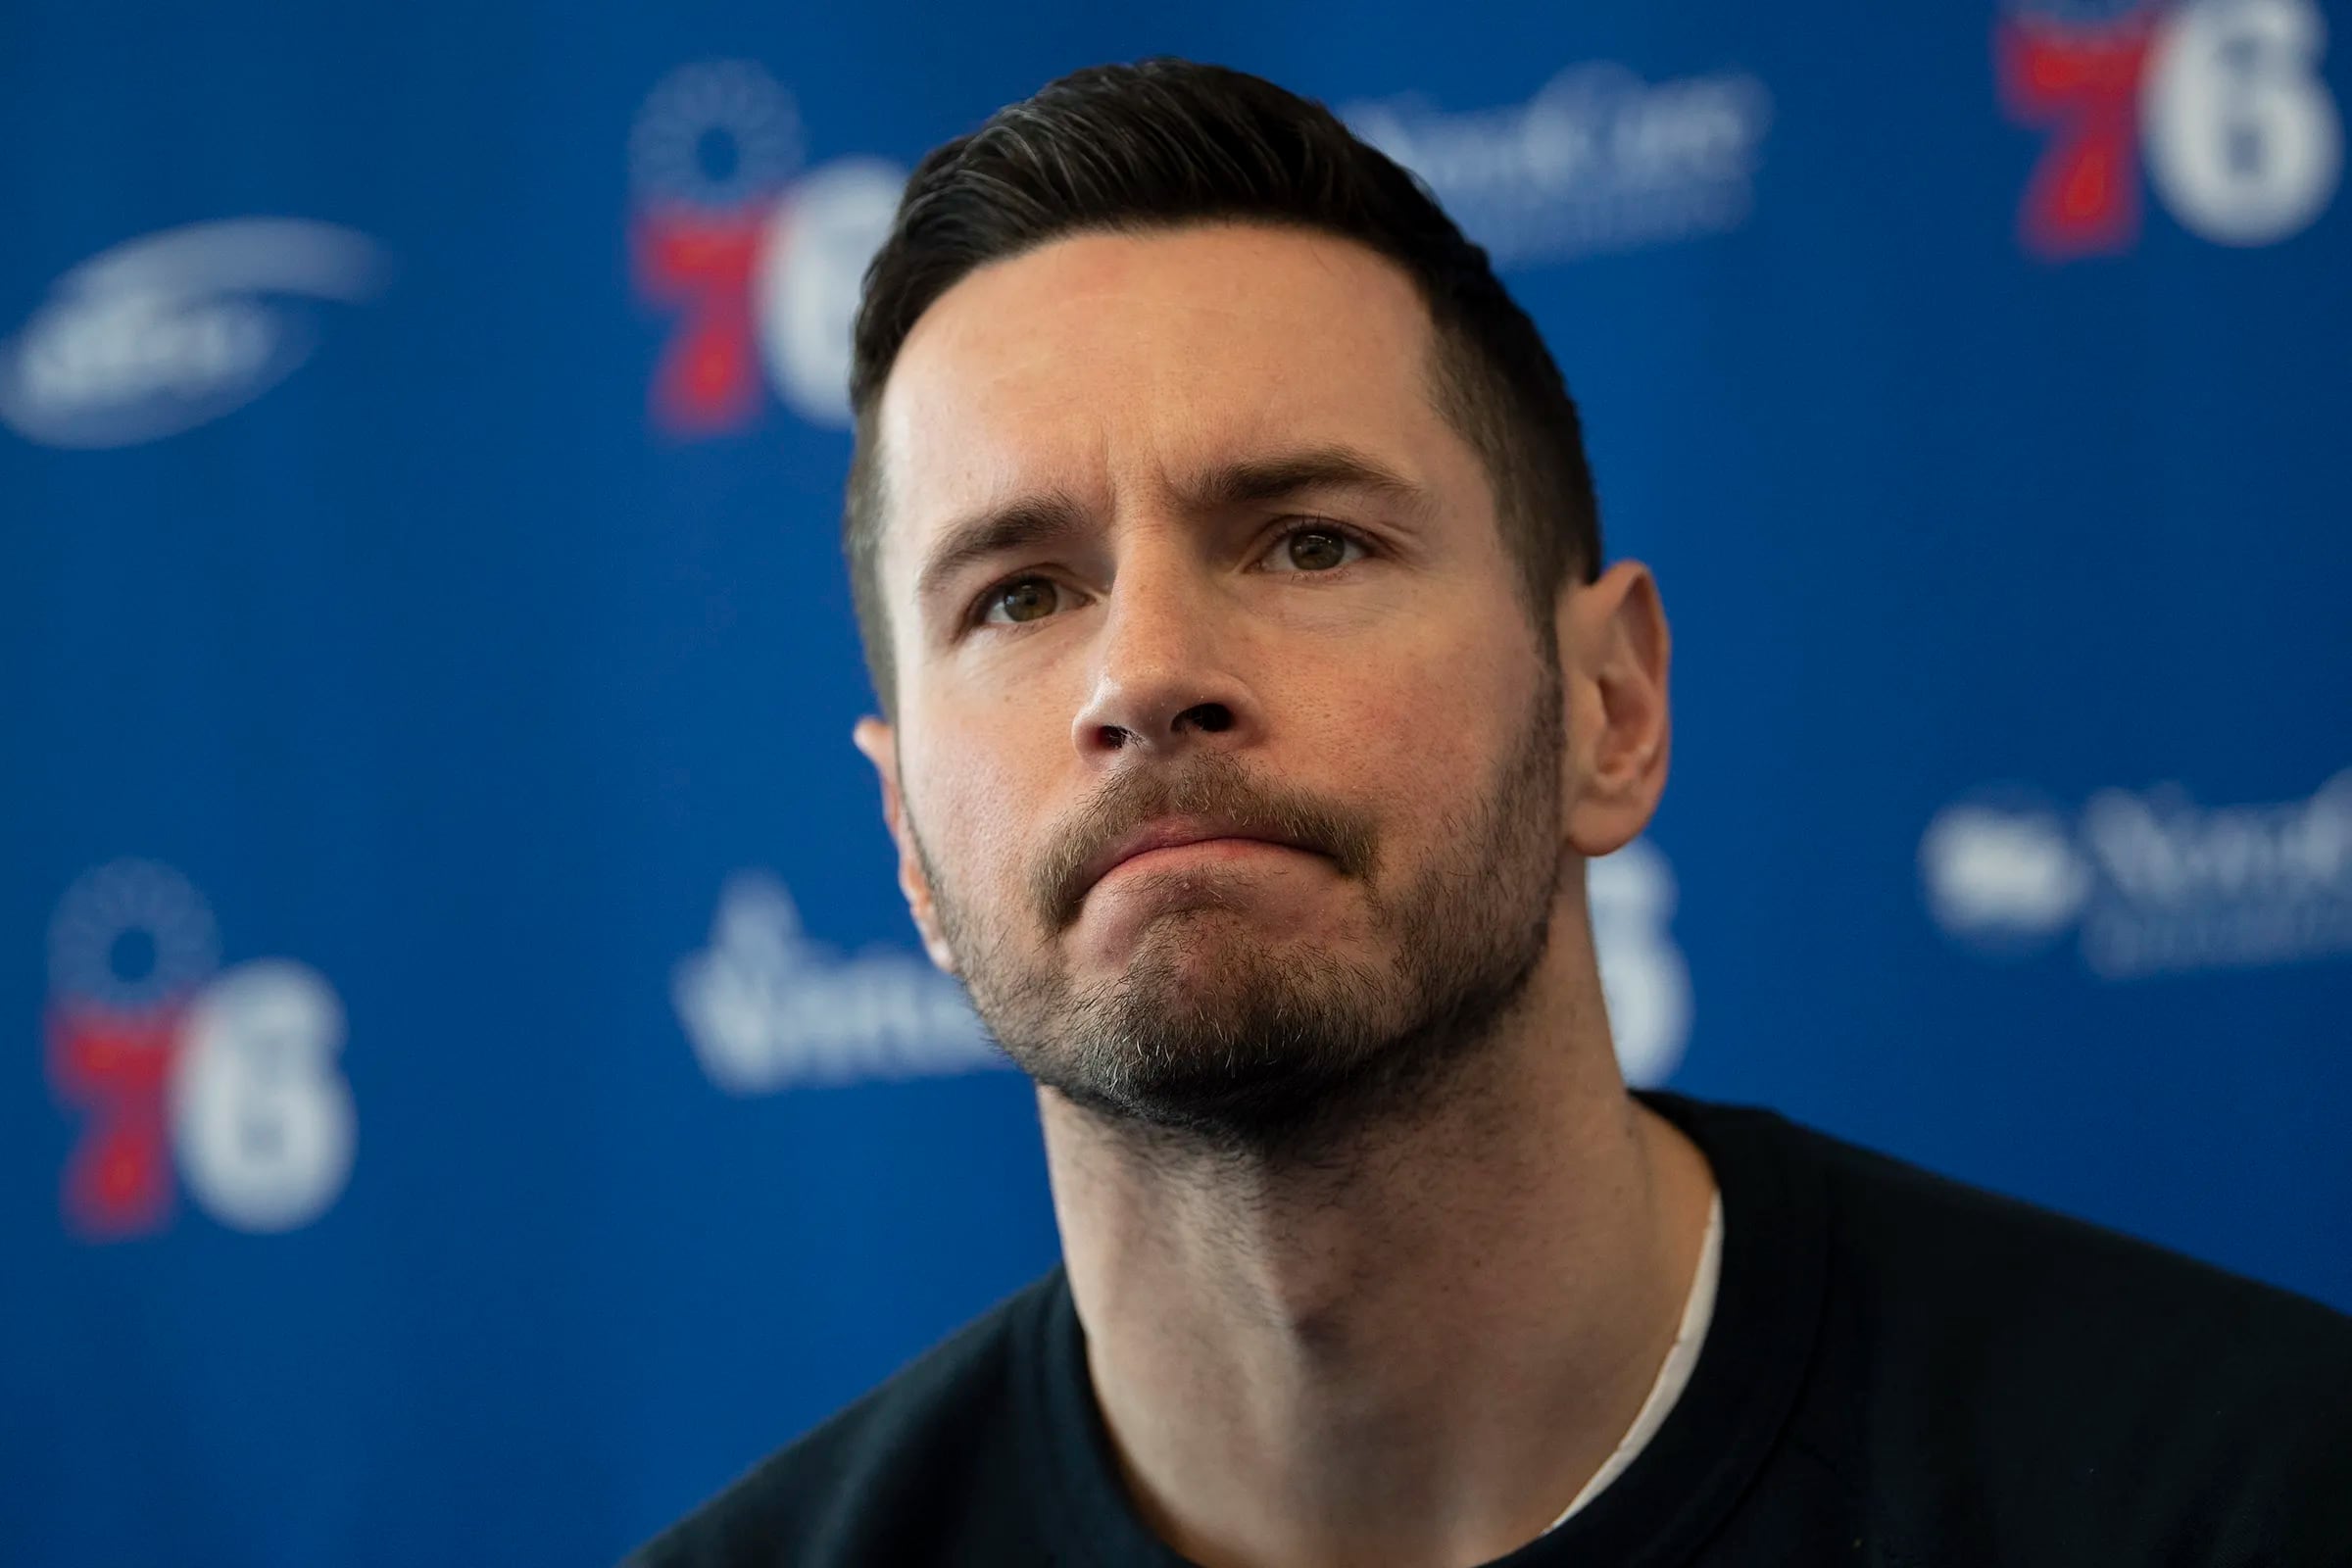 Former Sixers shooter JJ Redick will be in the booth calling tonight's play-in game on ESPN. 